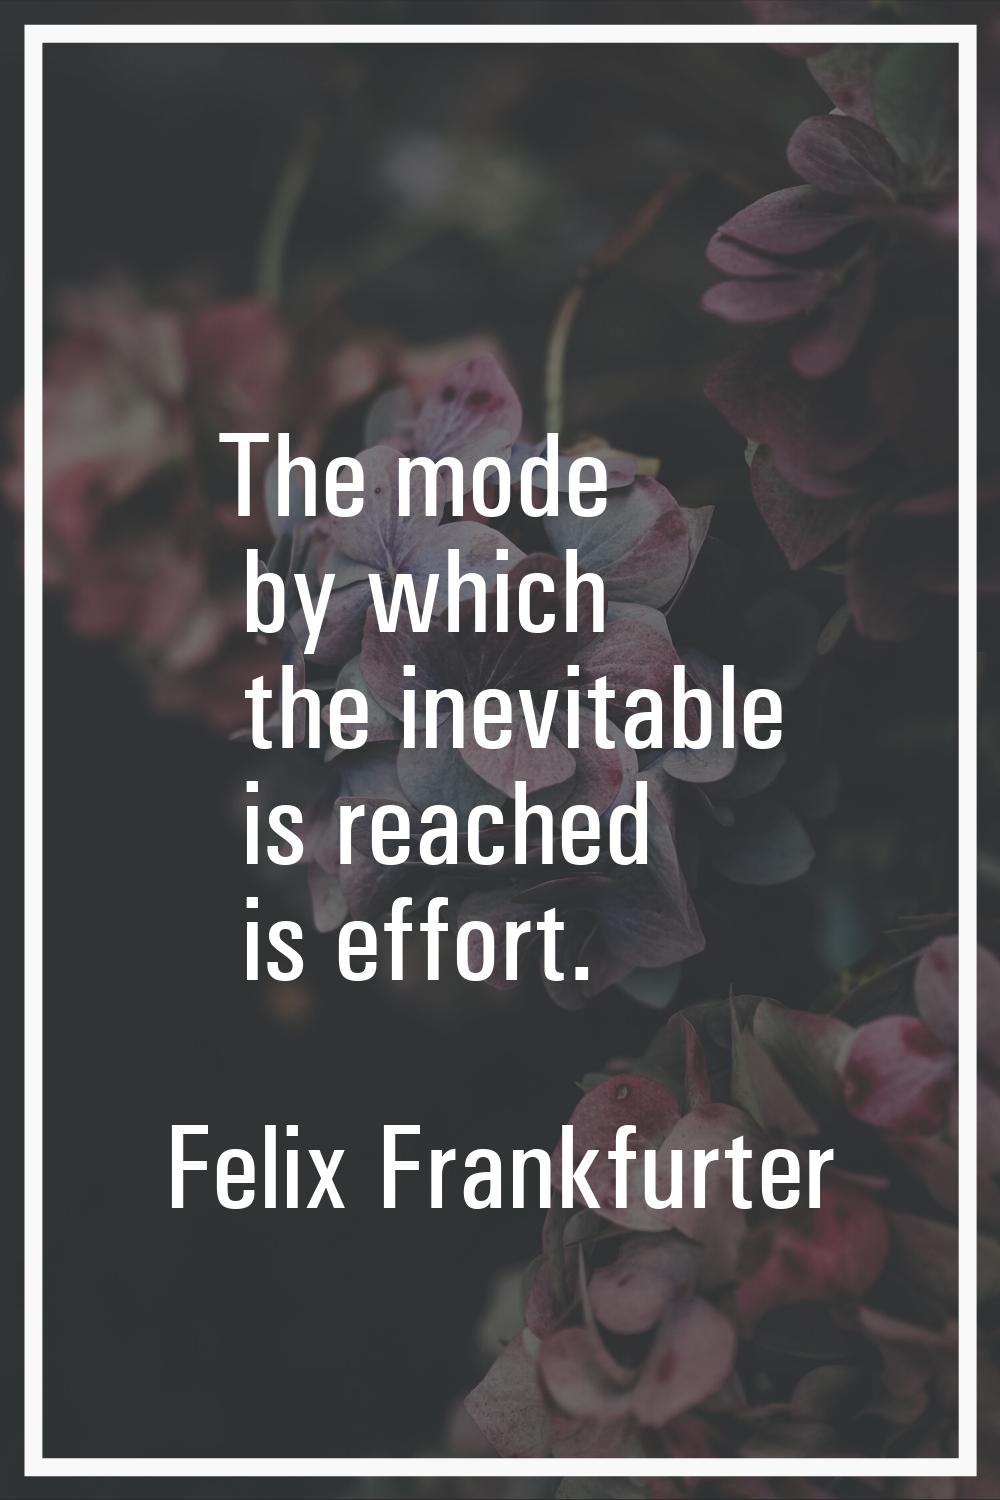 The mode by which the inevitable is reached is effort.